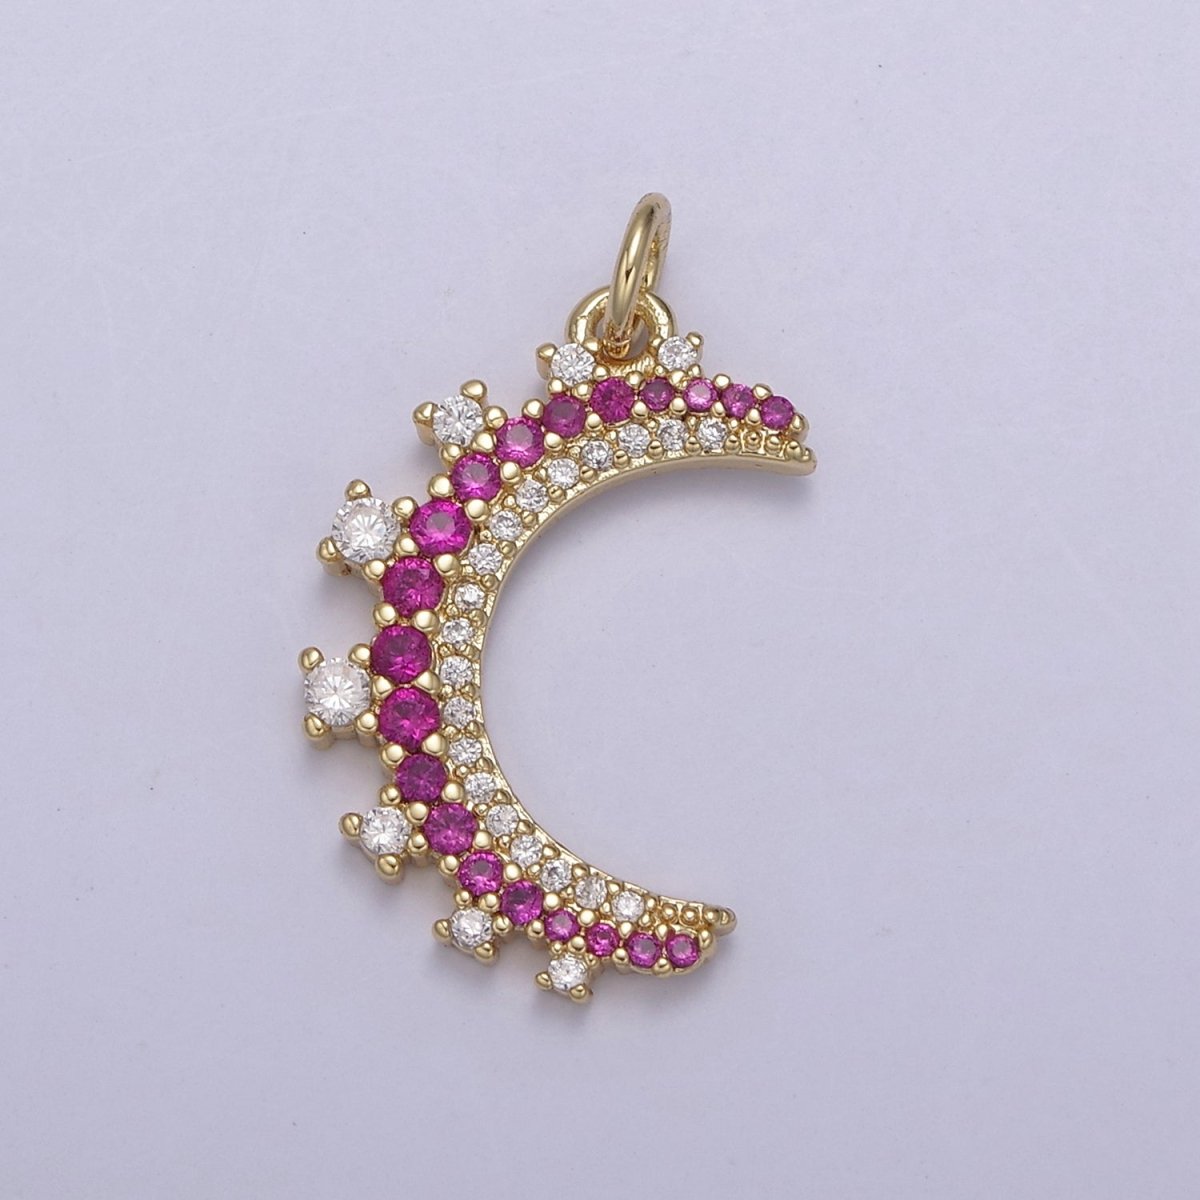 Wholesale 14k Gold Filled Crescent Moon Charm Micro Pave Half Moon Necklace Pendant CZ Moon Necklace Gold Celestial Jewelry N-783 - N-787 - DLUXCA